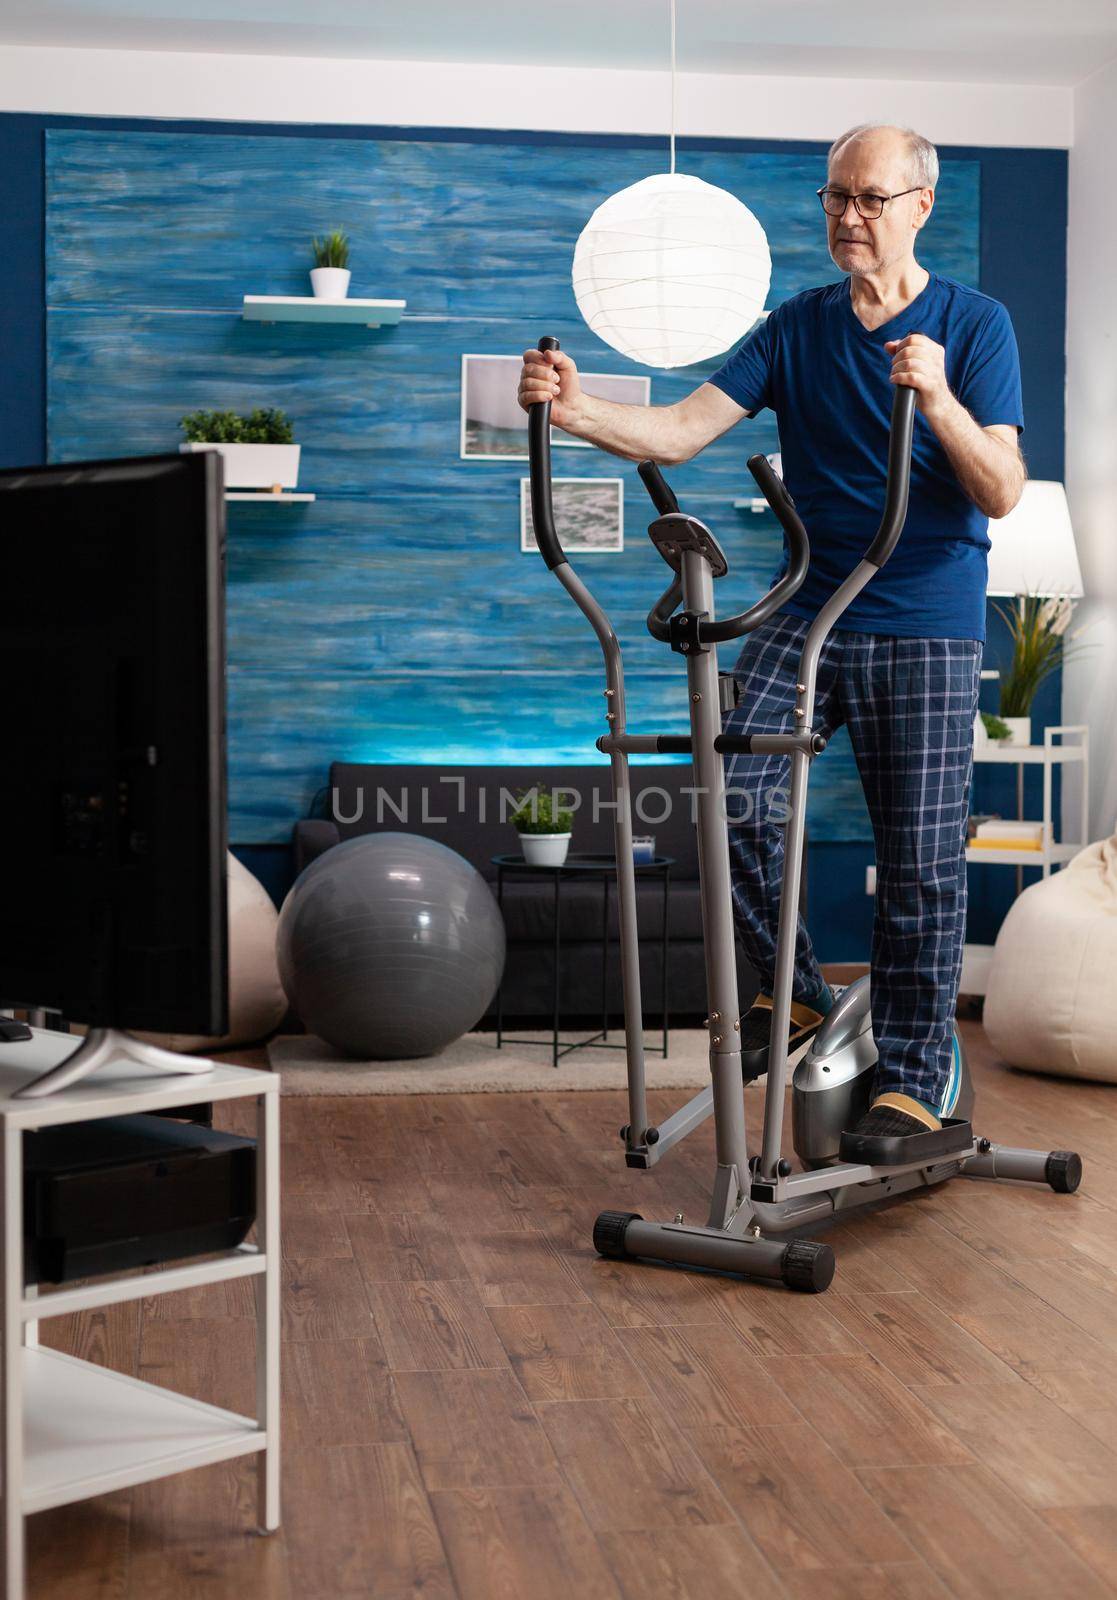 Focused retirement senior man working at legs resistance using cycling bicycle machine watching aerobics video on television for well being. Pensioner training body muscle during health cardio workout